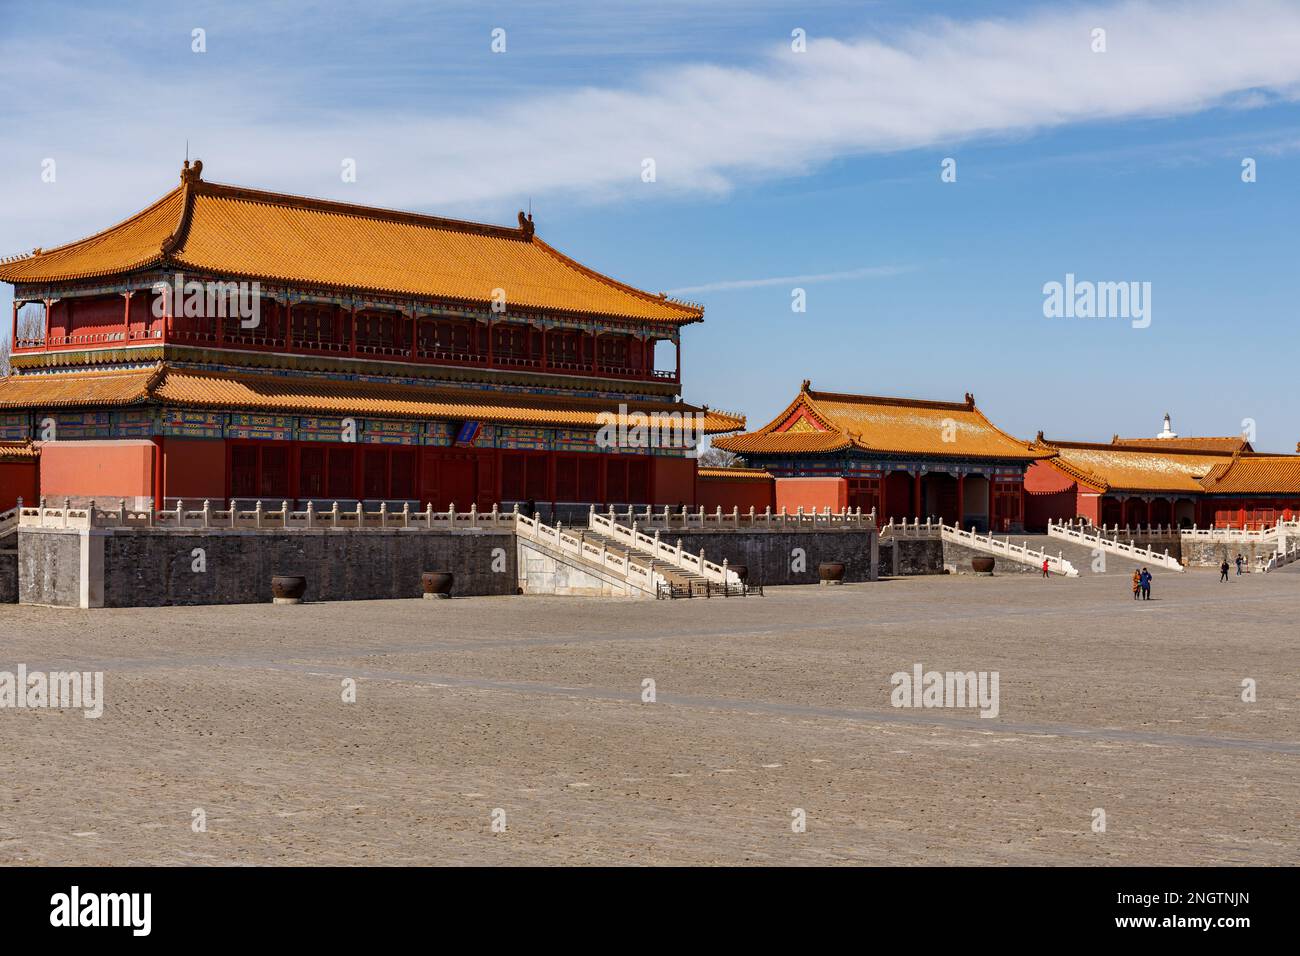 BEIJING; CHINA - MARCH 14, 2018: Impressions from the Forbidden City in Beijing, China on March 14, 2018. Stock Photo